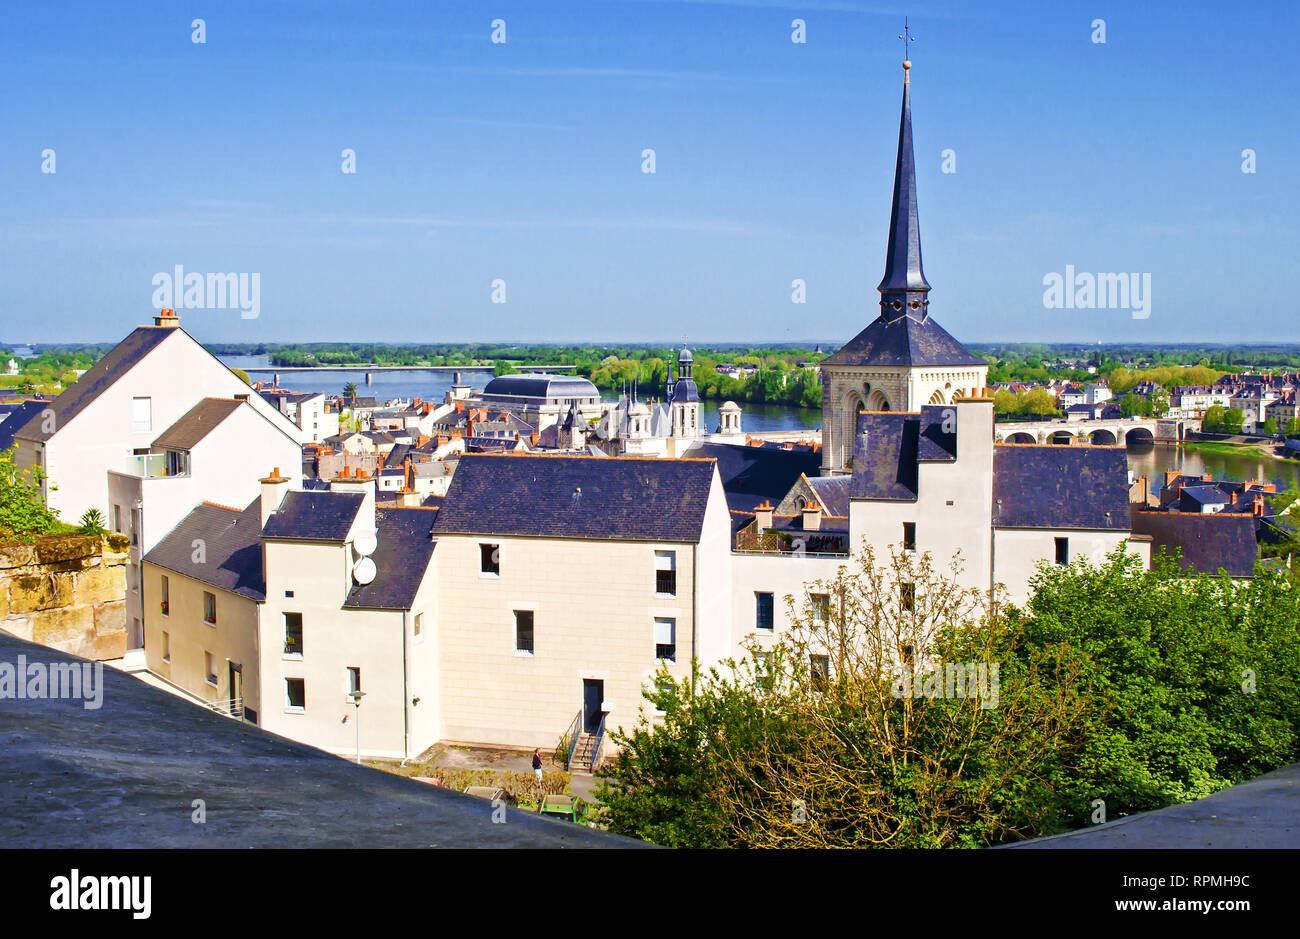 Breathtaking view on amazing small town Saumur, France. Many white and gray houses near a Loire river, bridge, lots of green trees and rooftops. Warm  Stock Photo